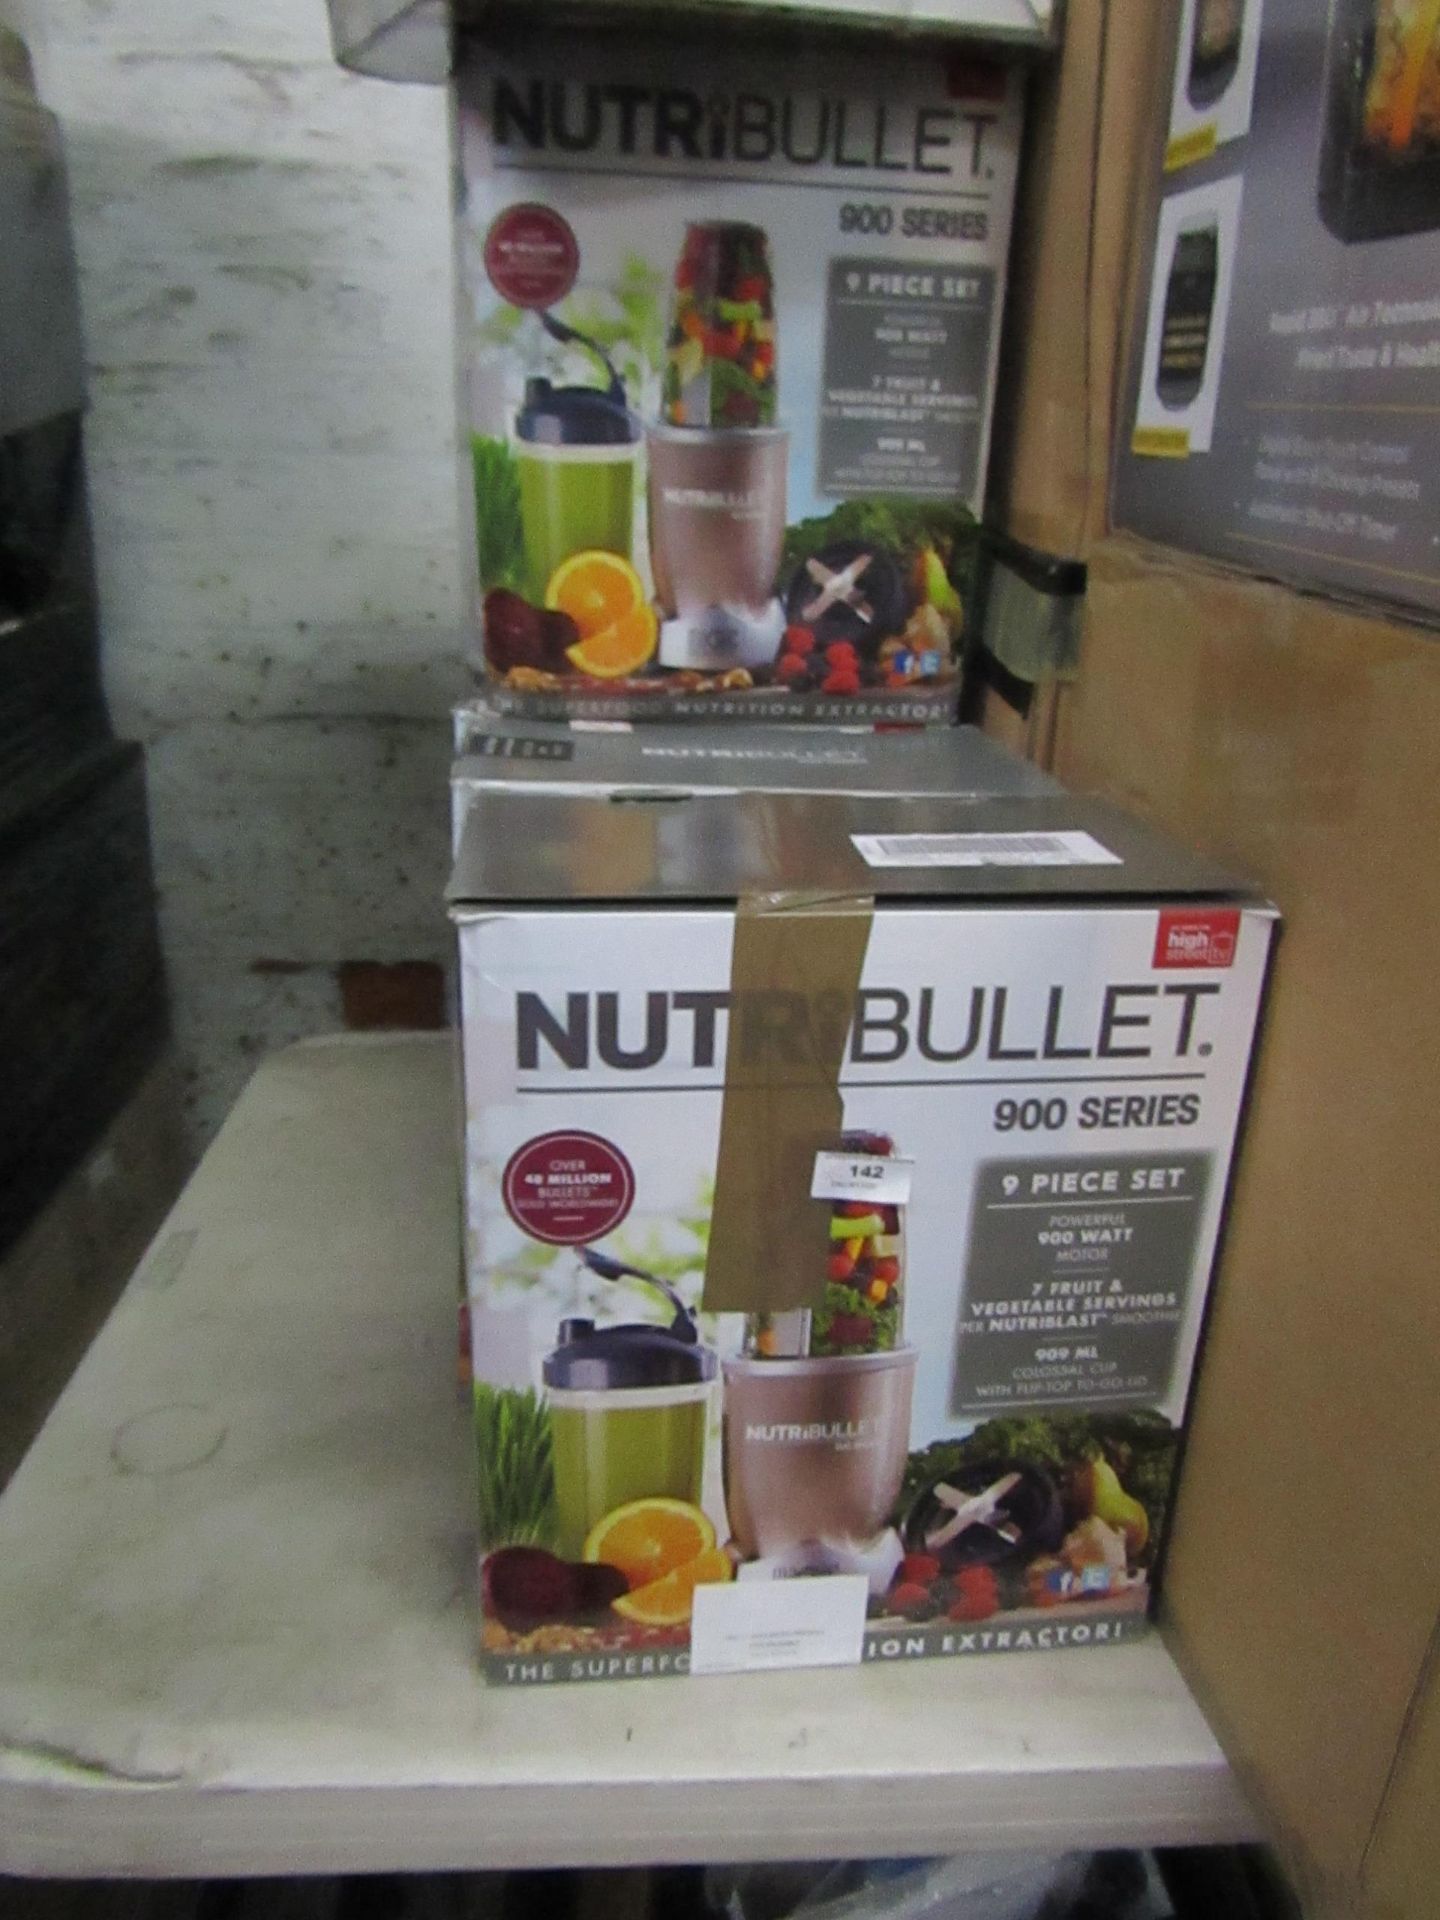 | 5X | NUTRI BULLET 900 SERIES | UNCHECKED AND BOXED | NO ONLINE RE-SALE | SKU C5060191467353 |